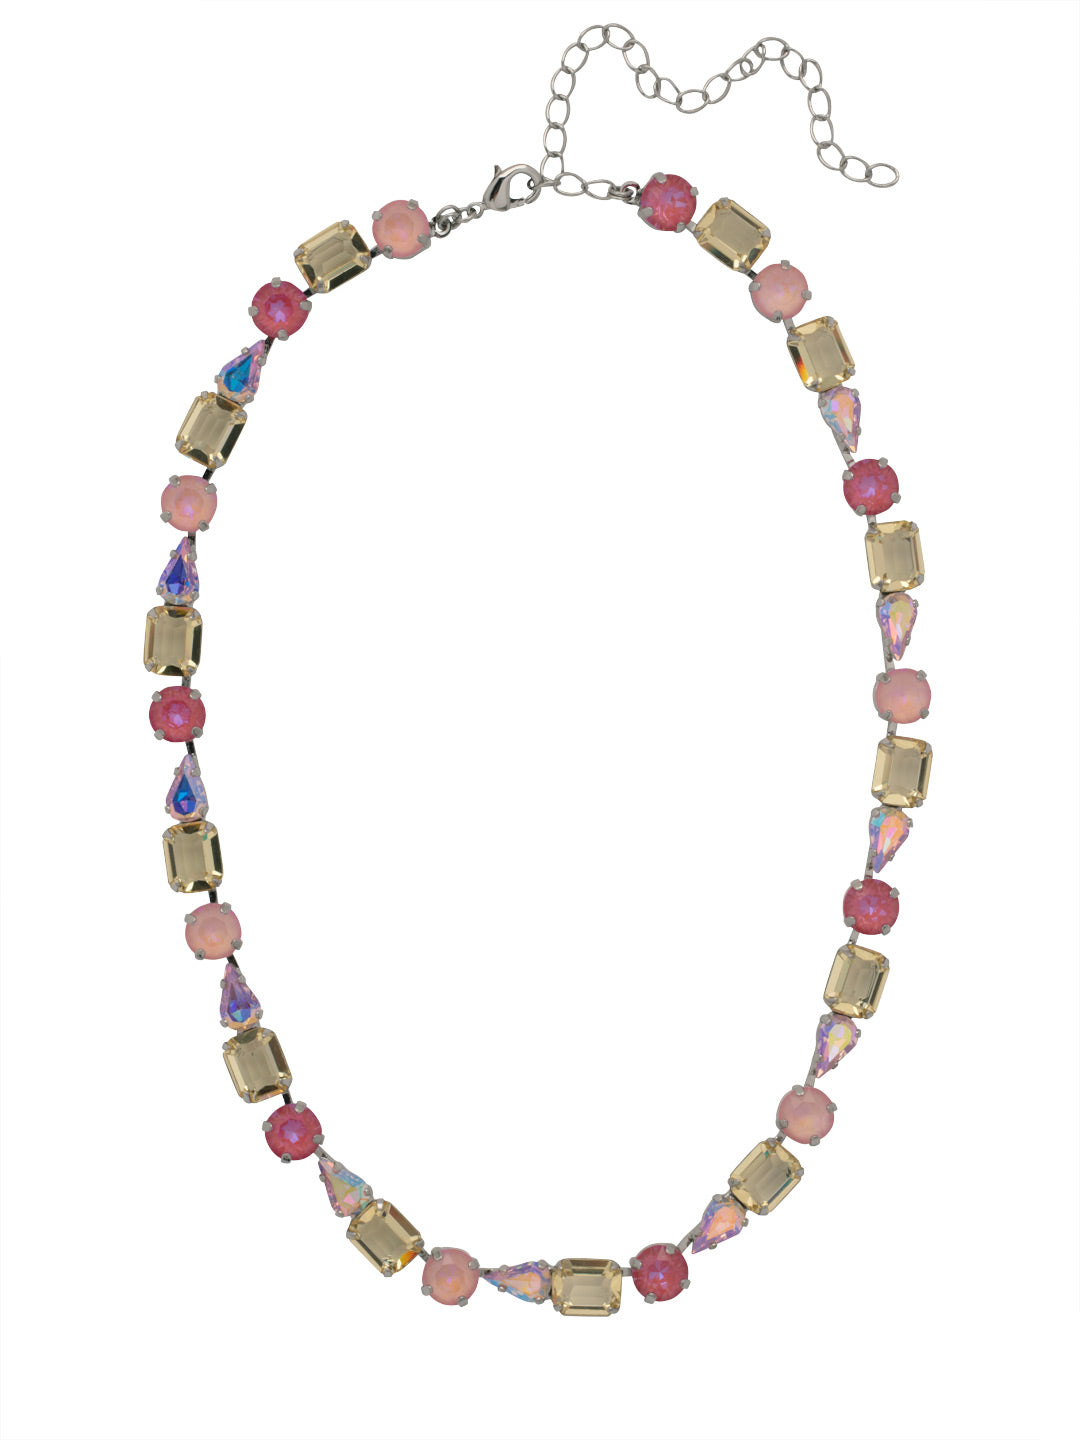 Maude Tennis Necklace - NFF77PDPPN - <p>The Maude Tennis Necklace features a full line of various cuts and colors of crystals on an adjustable chain, secured by a lobster claw clasp. From Sorrelli's Pink Pineapple collection in our Palladium finish.</p>